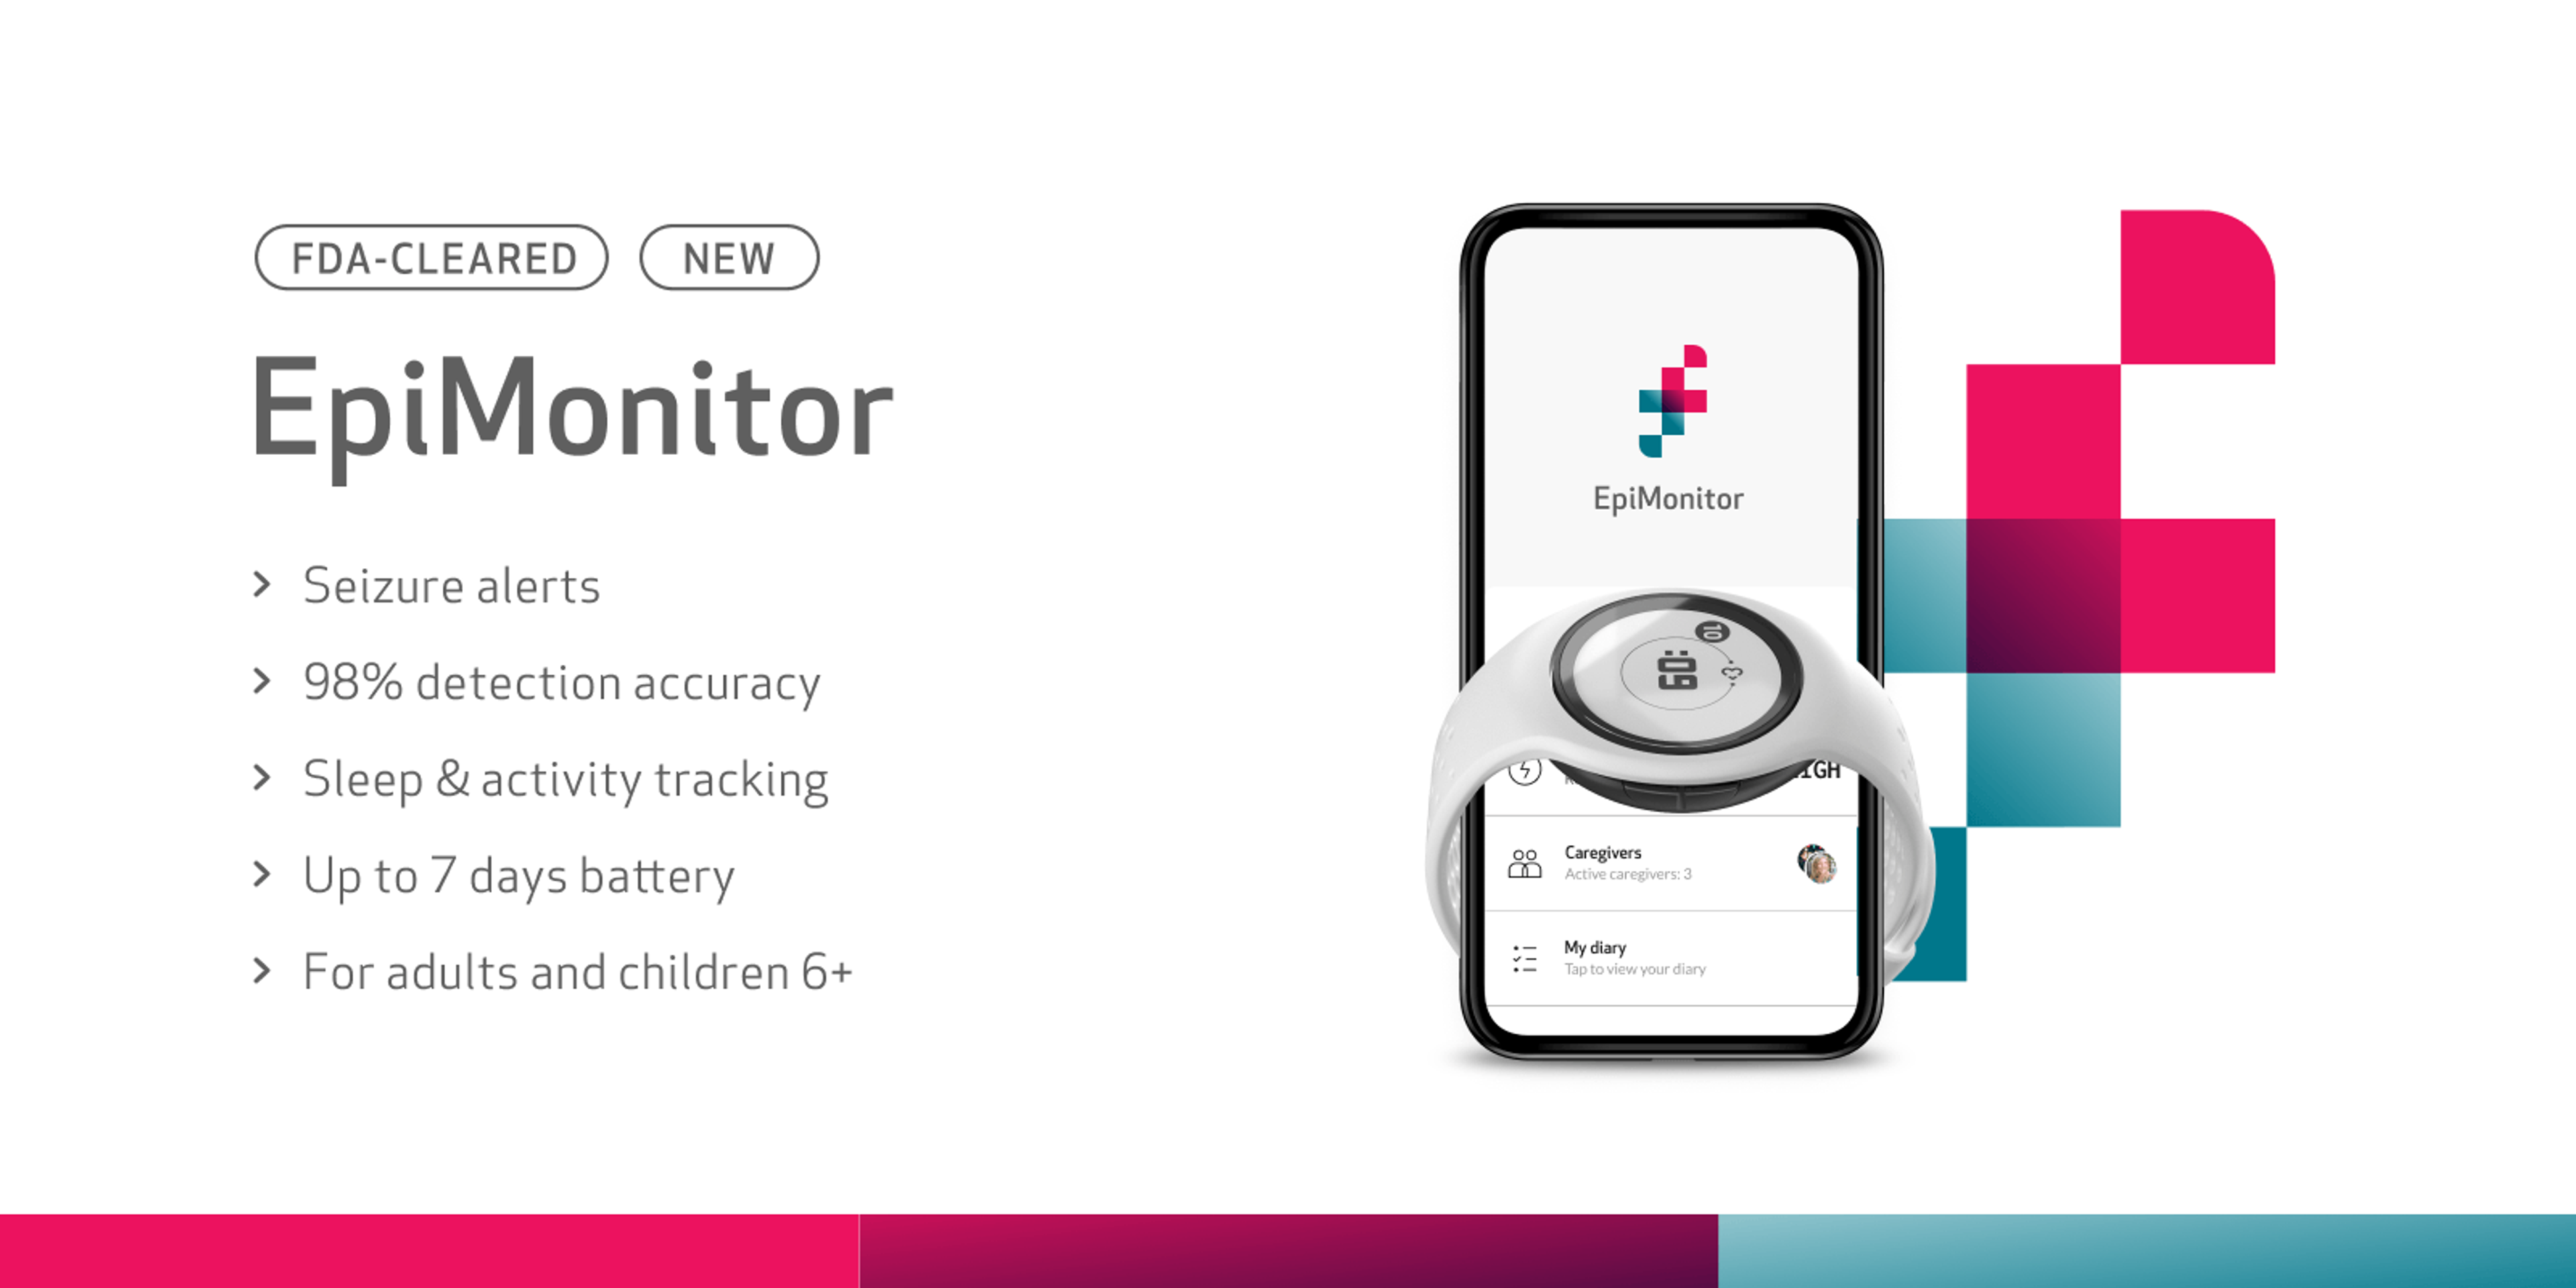 EpiMonitor is the next generation FDA-cleared solution for people living with epilepsy